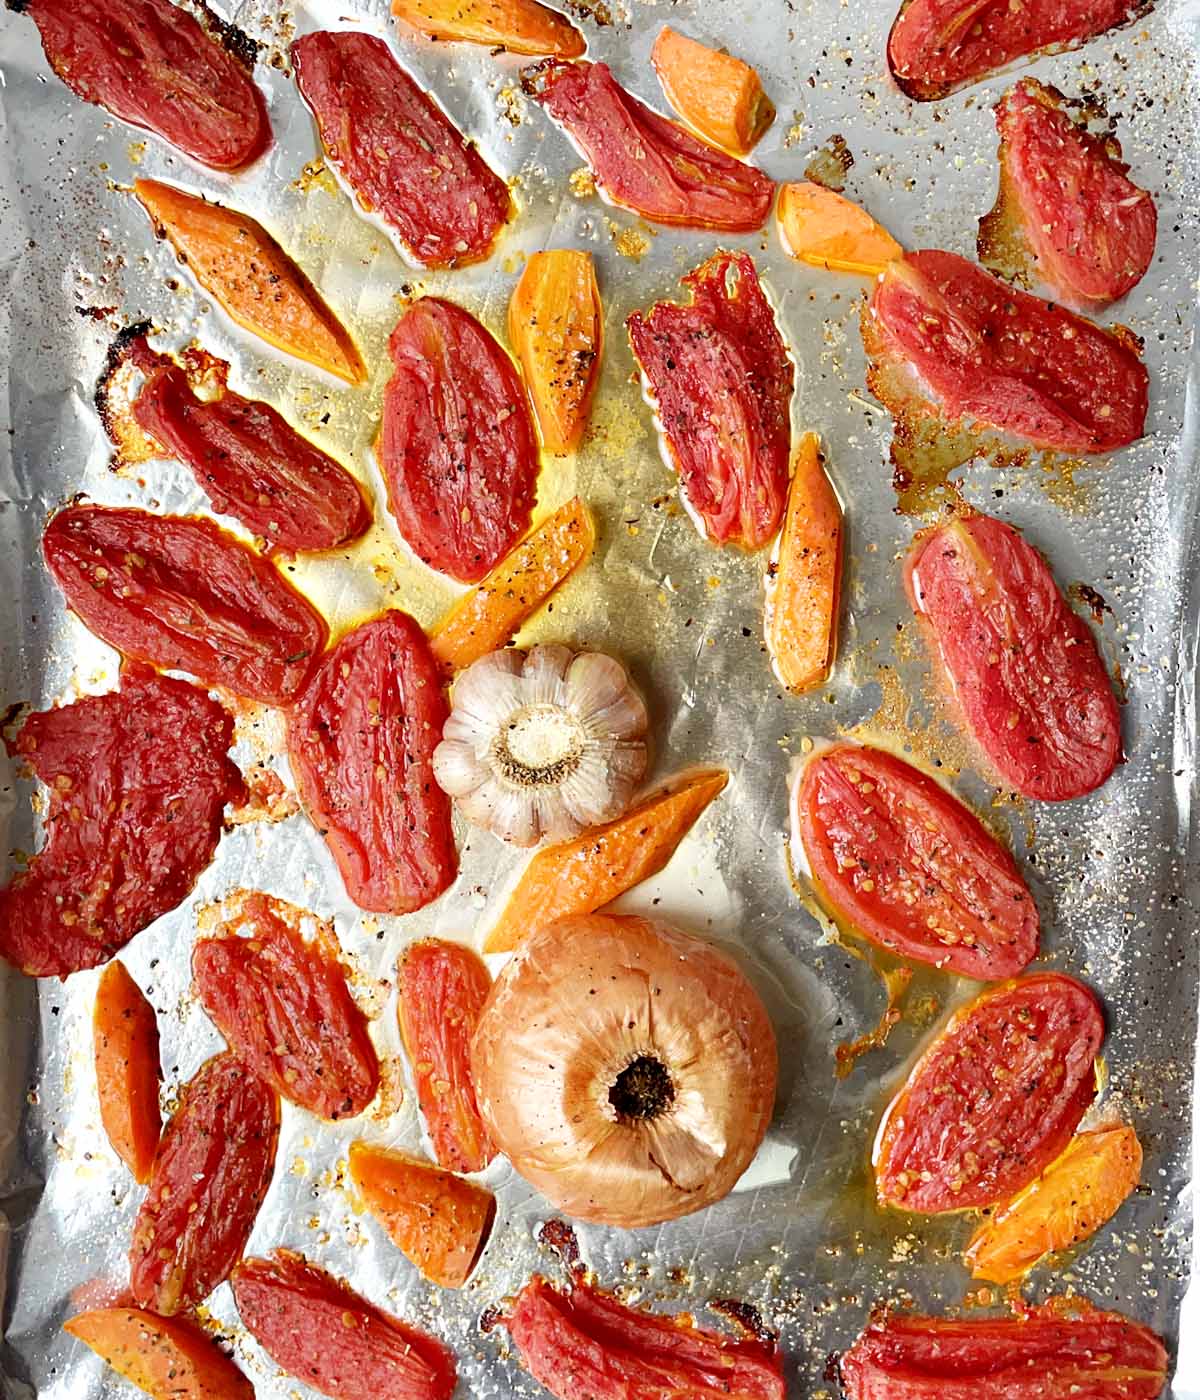 Roasted tomatoes, carrots, garlic, and onion on a foil-lined baking sheet.